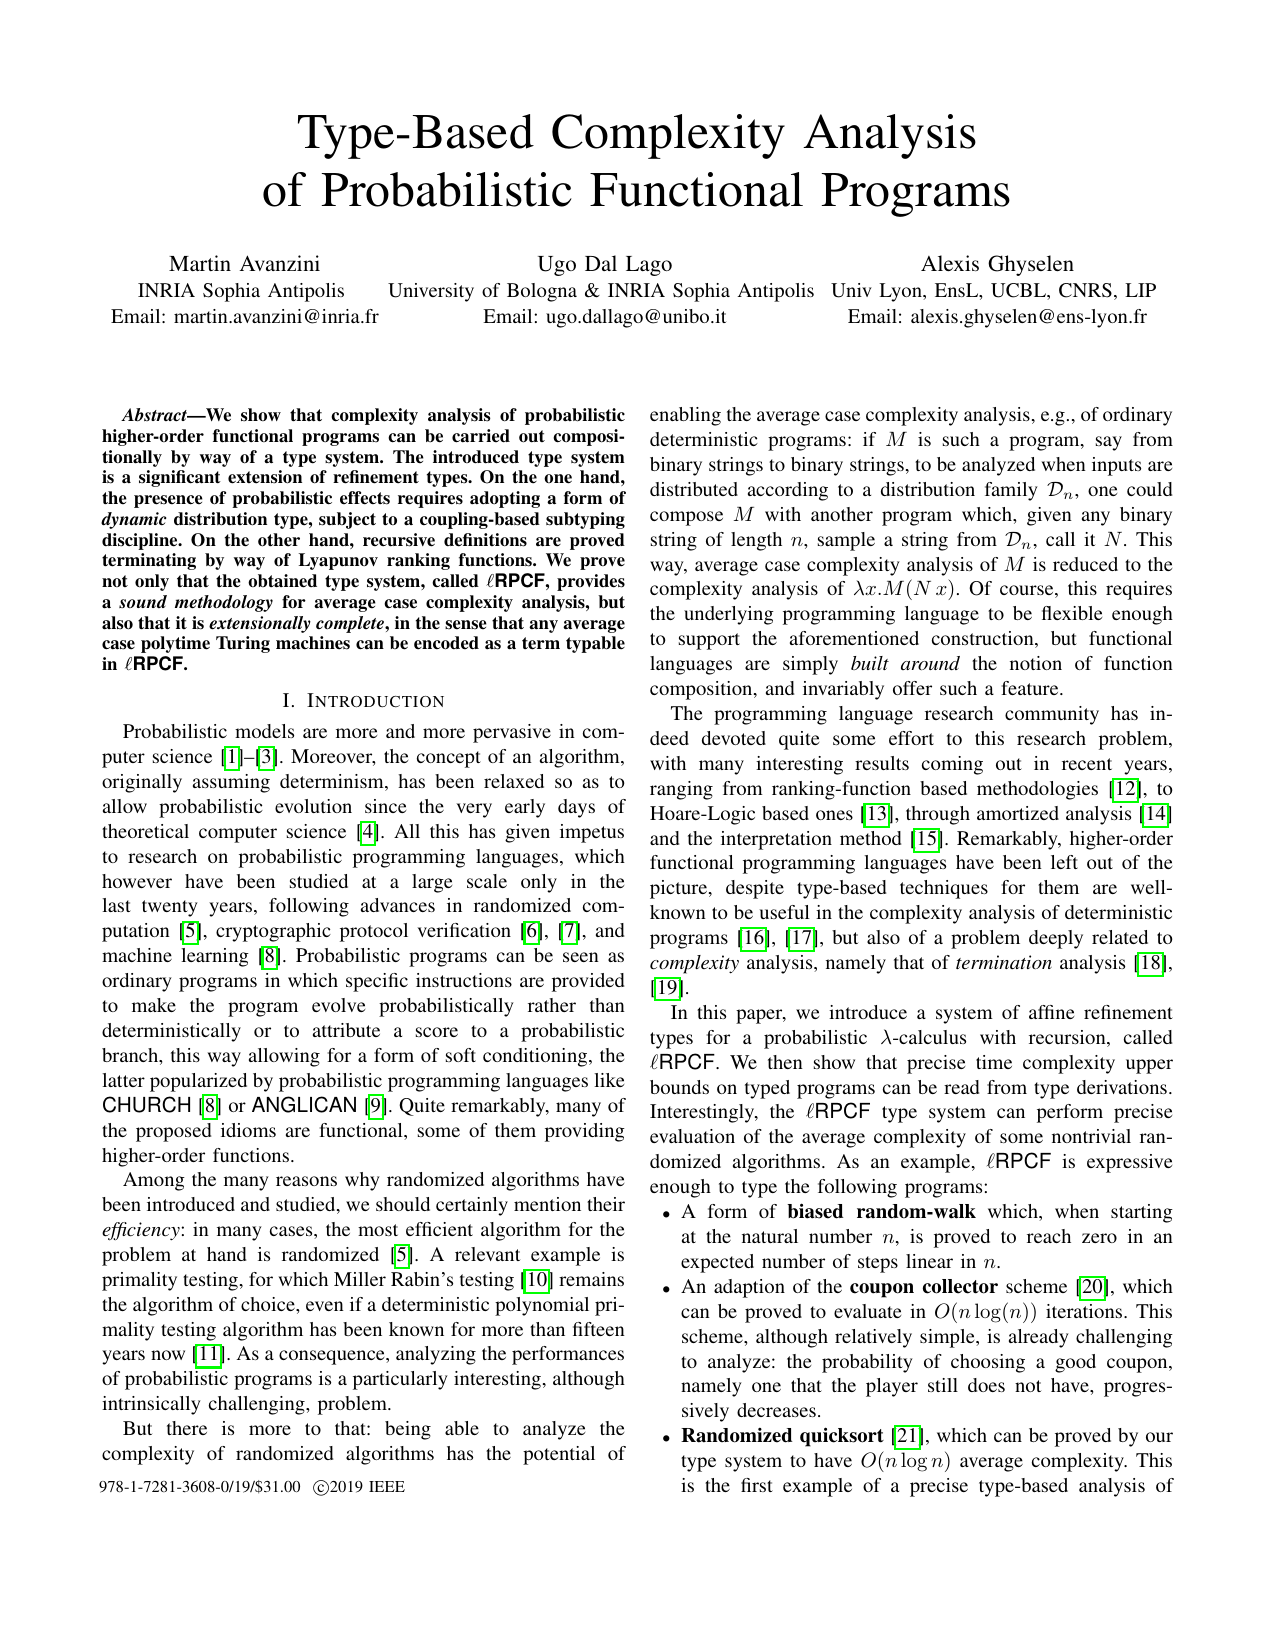 Type-Based Complexity Analysis of Probabilistic Functional Programs